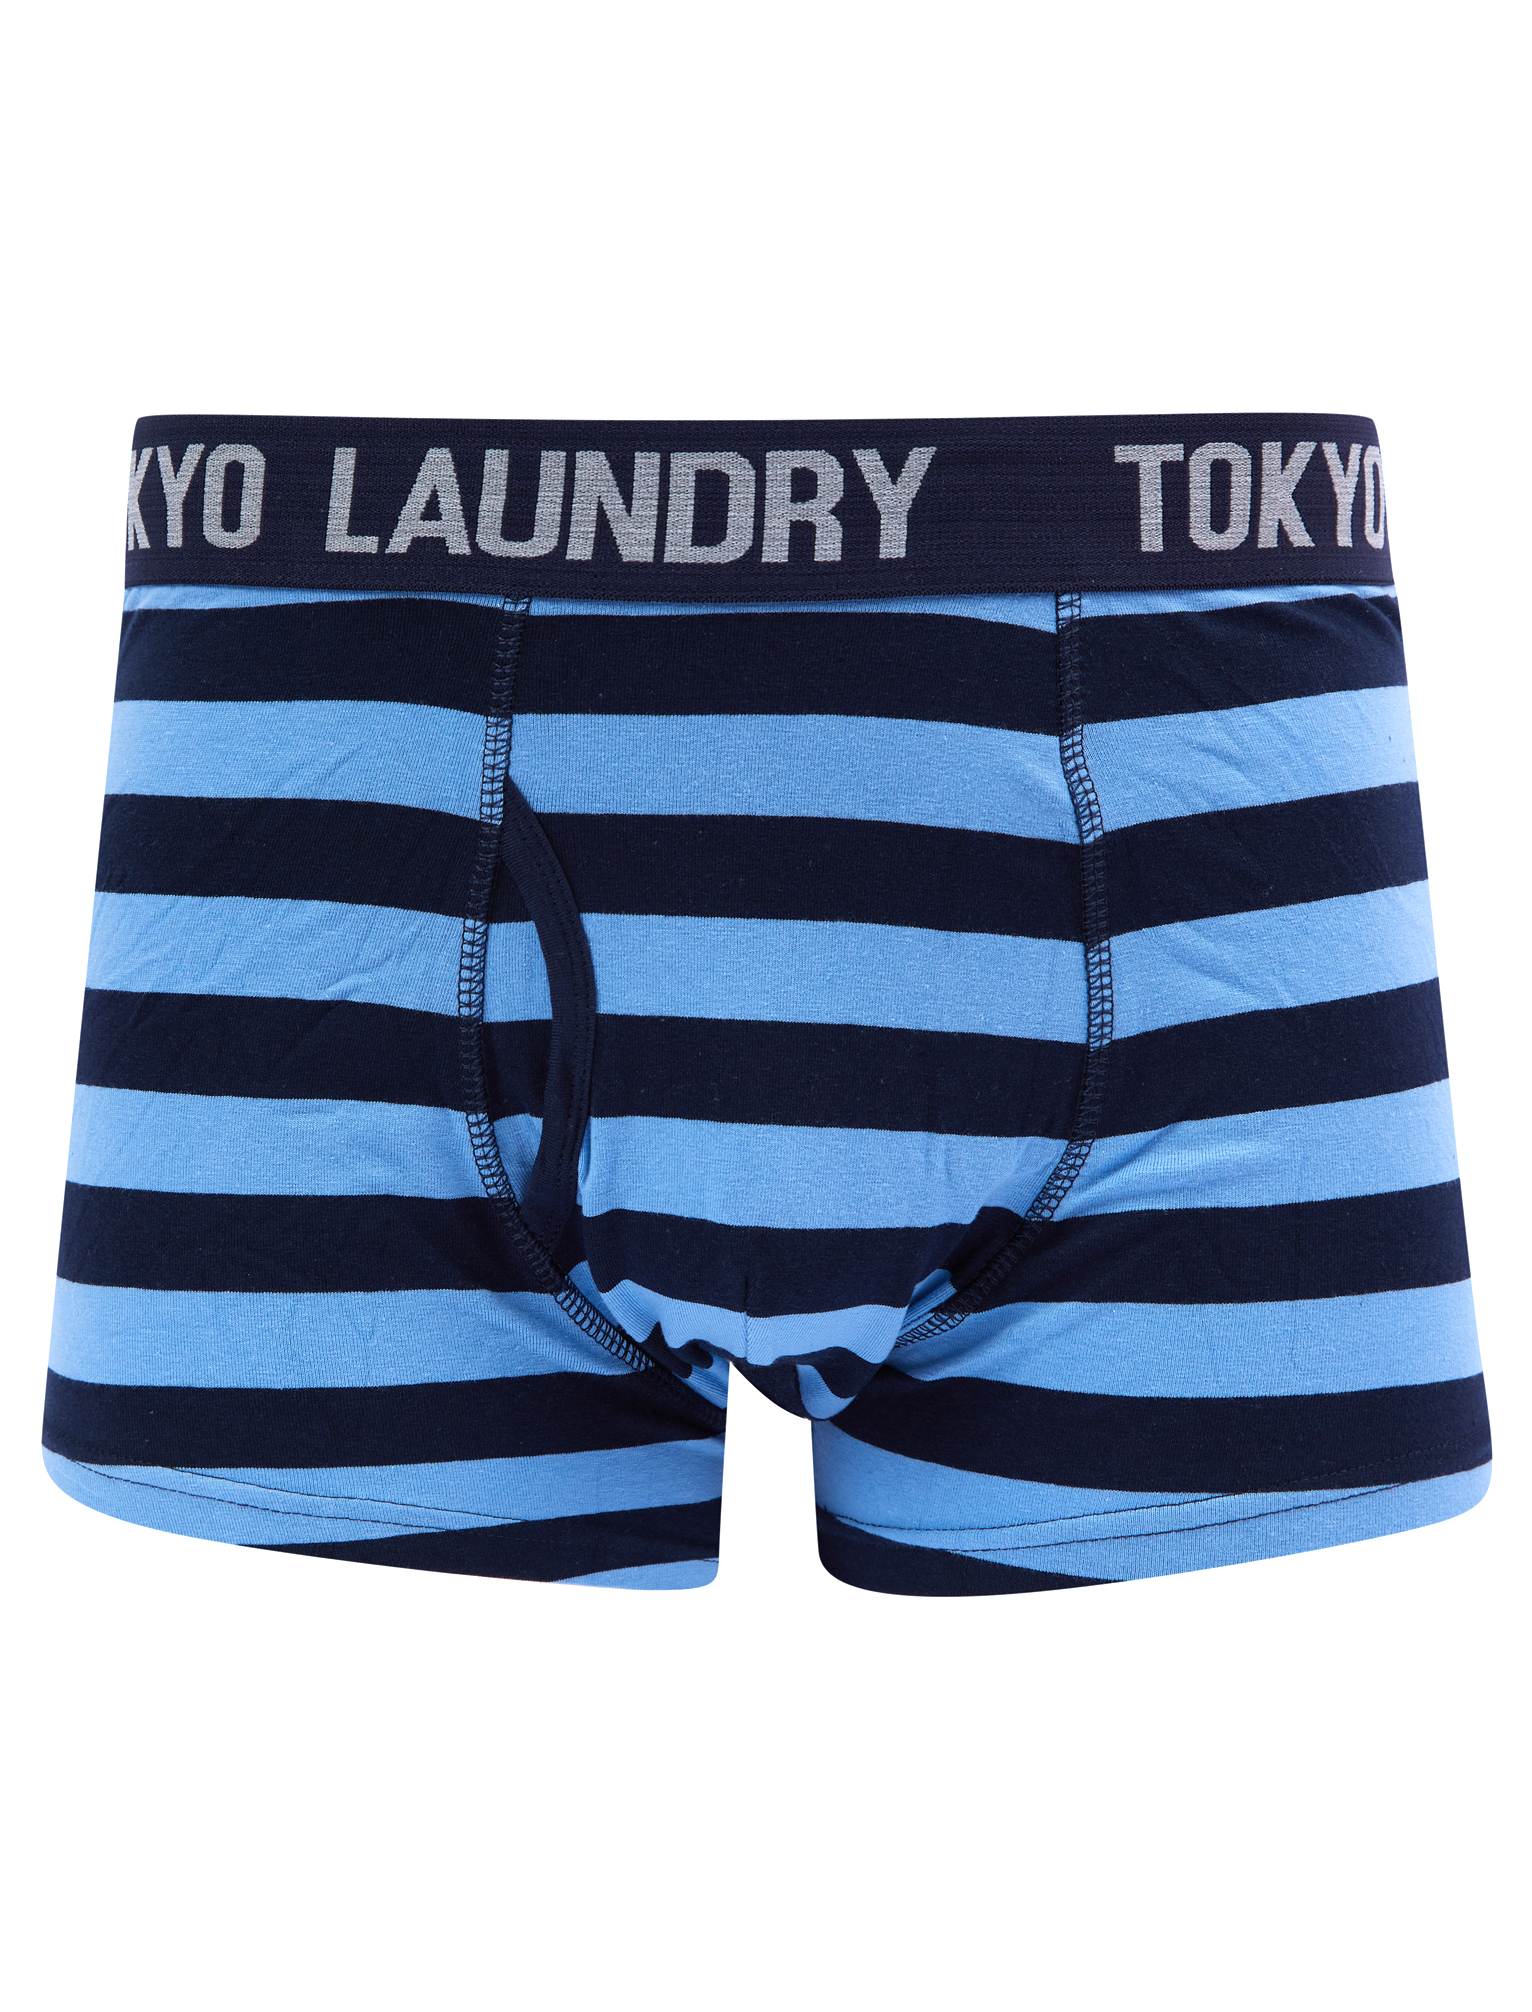 Tokyo Laundry Boxer Shorts Men's 2 Pack Striped Stretch Cotton Underwear  Boxers